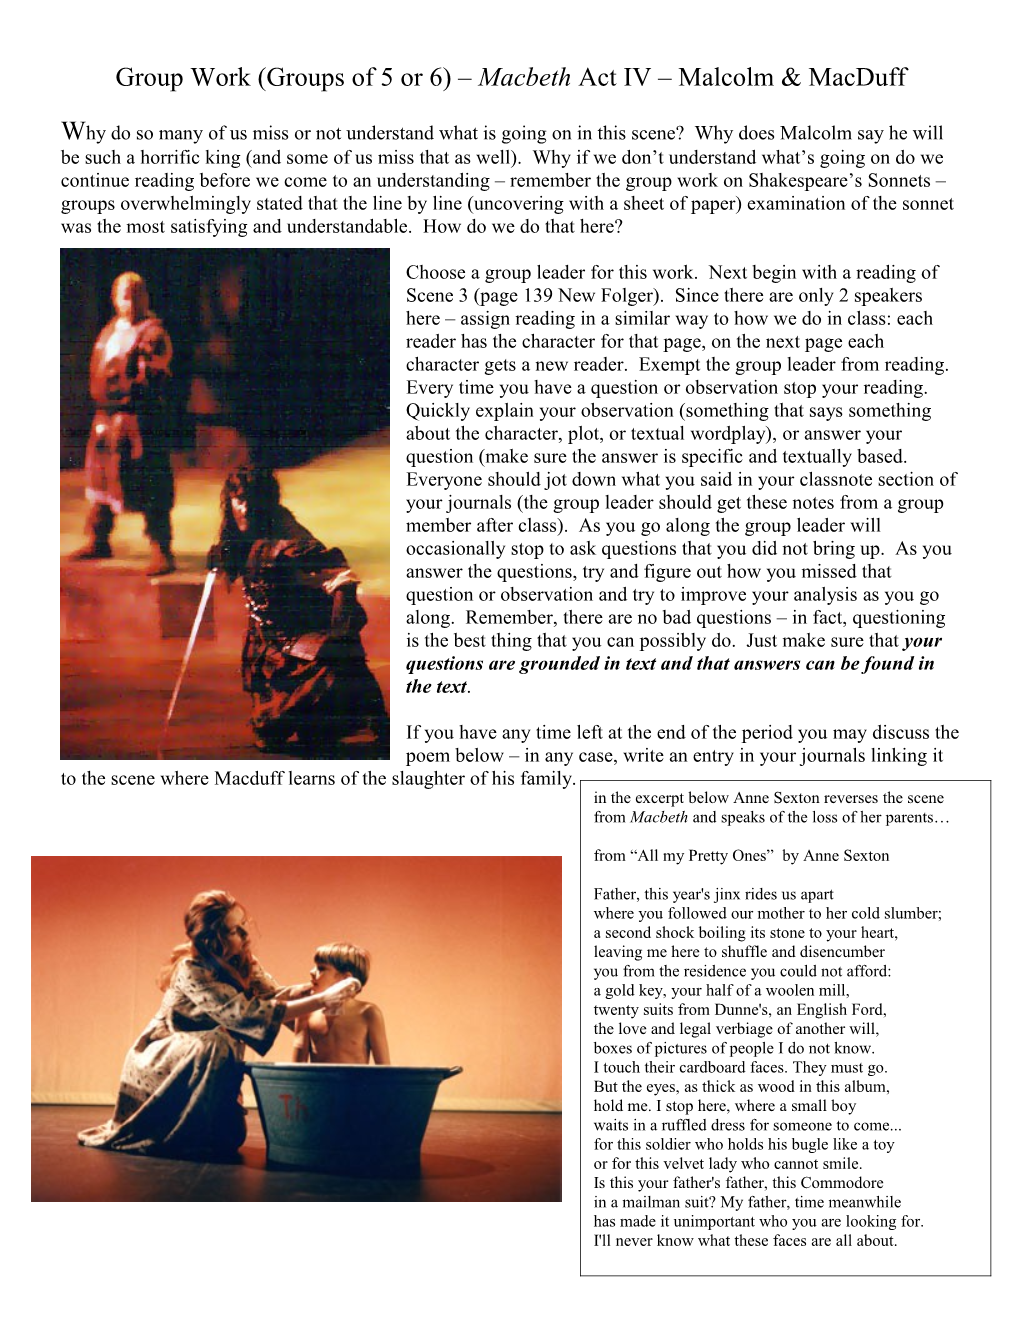 Group Work (Groups of 5 Or 6) Macbeth Act IV Malcolm & Macduff